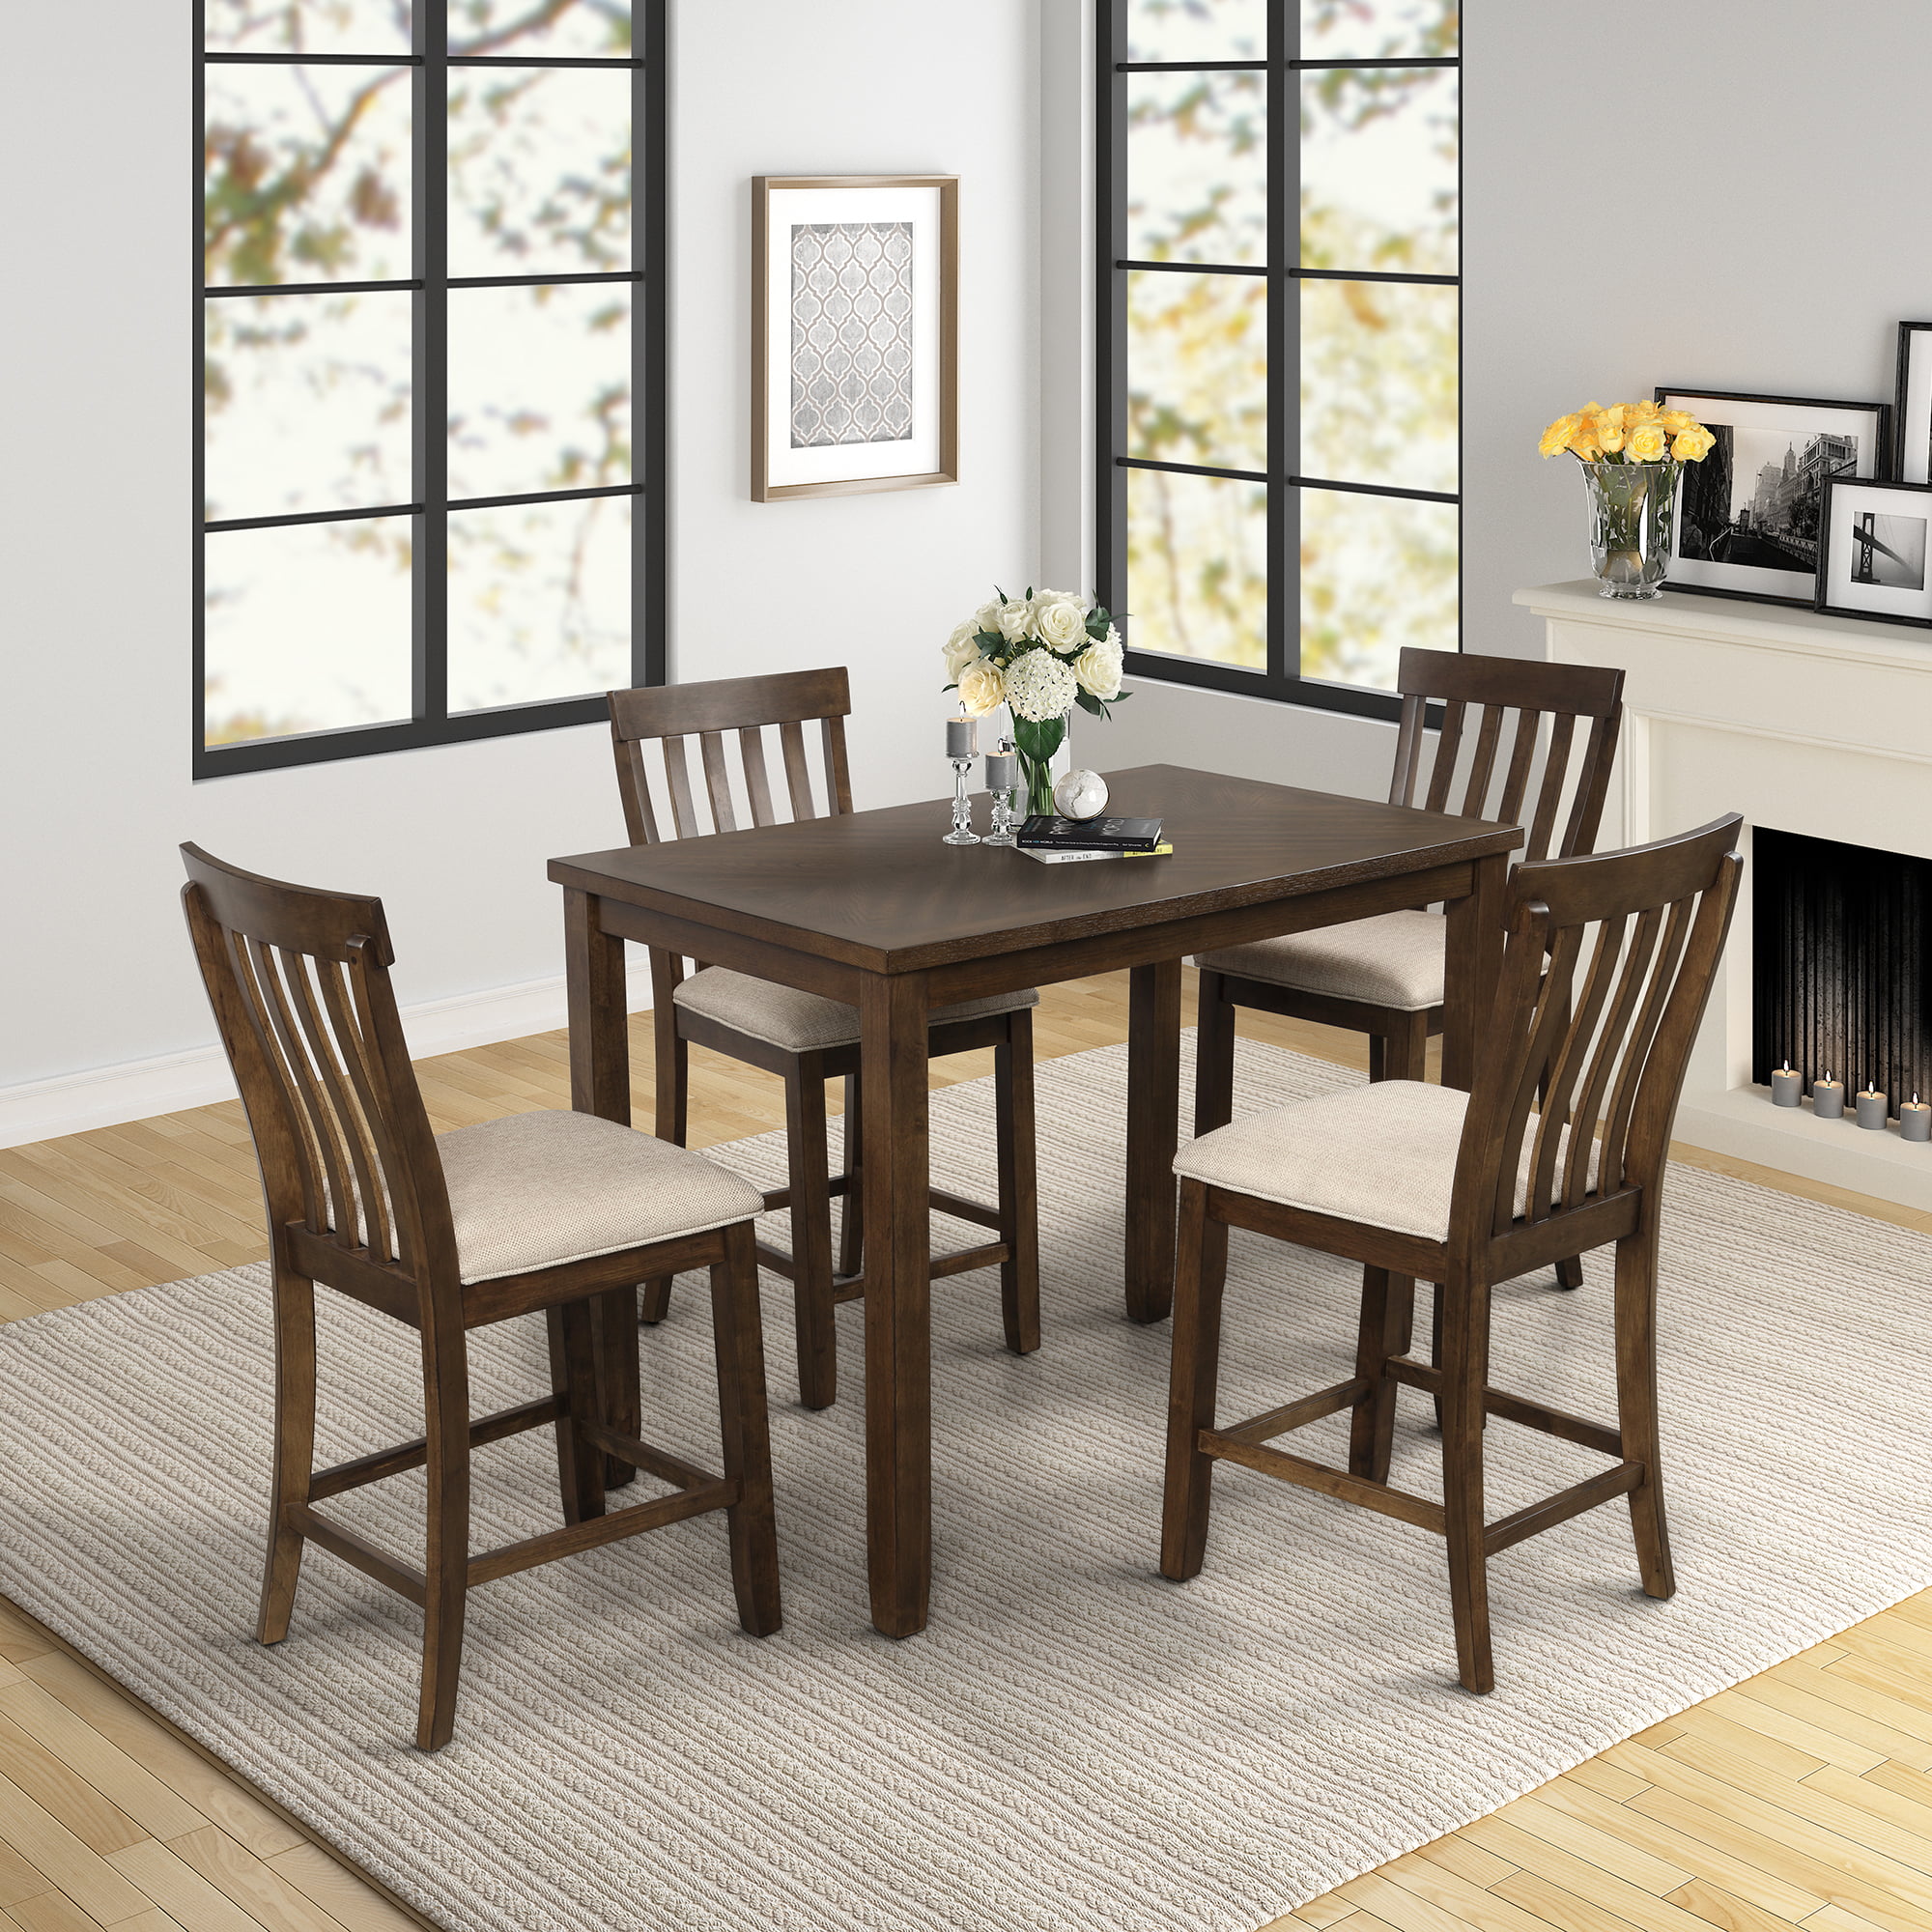 5 Piece Dining Table and Chair Set, Wooden Dining Room Table and Set of